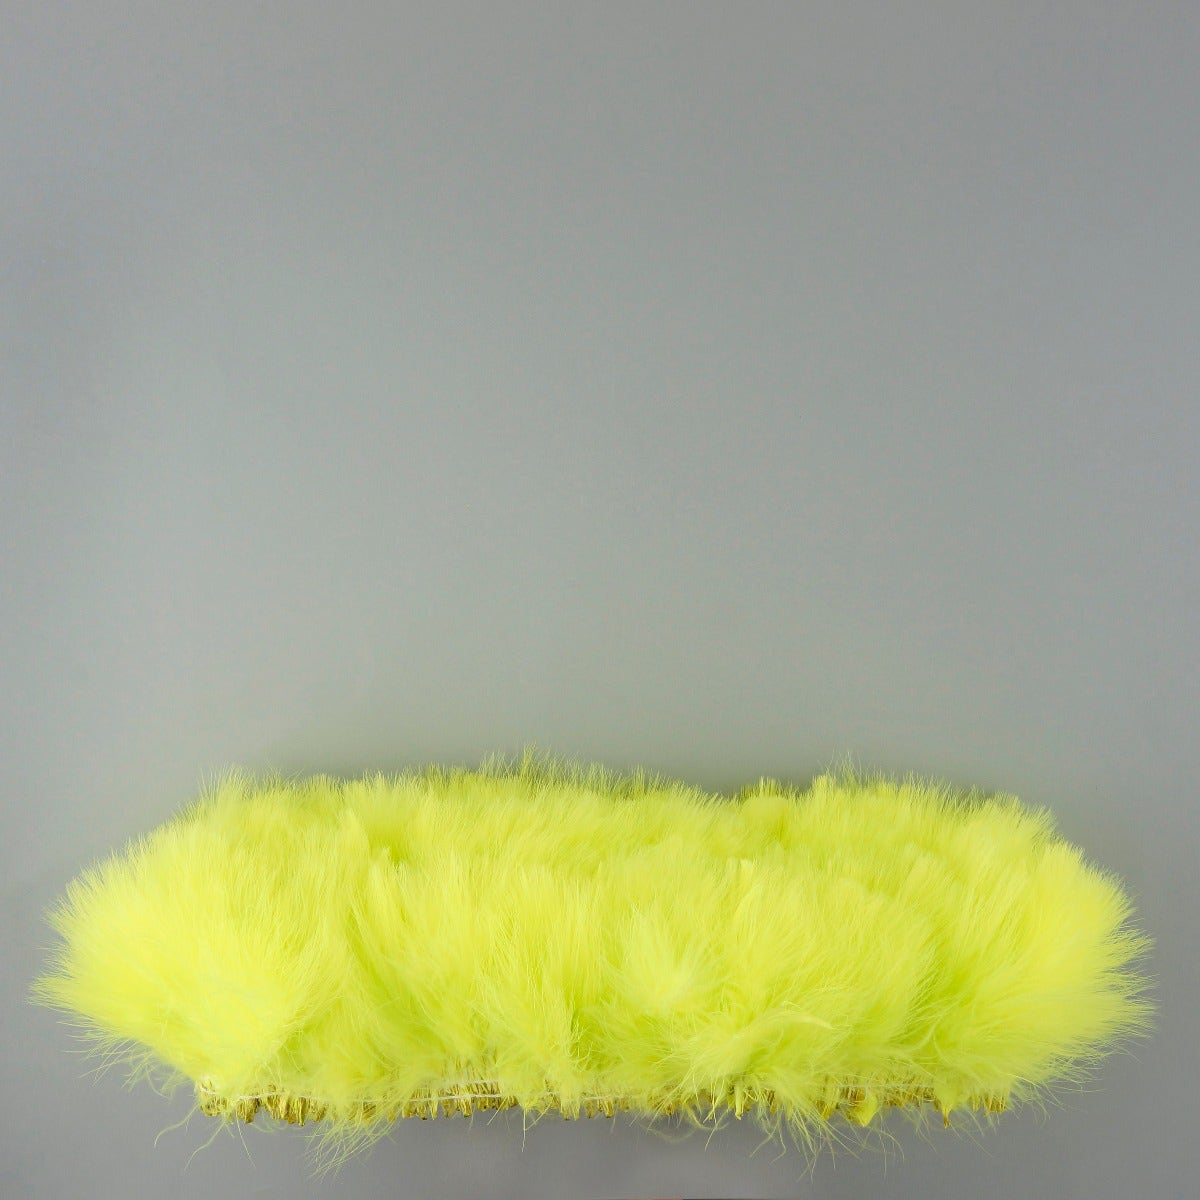 STRUNG TURKEY MARABOU BLOOD QUILL FEATHERS - 3-4"  FLUORESCENT CHARTREUSE